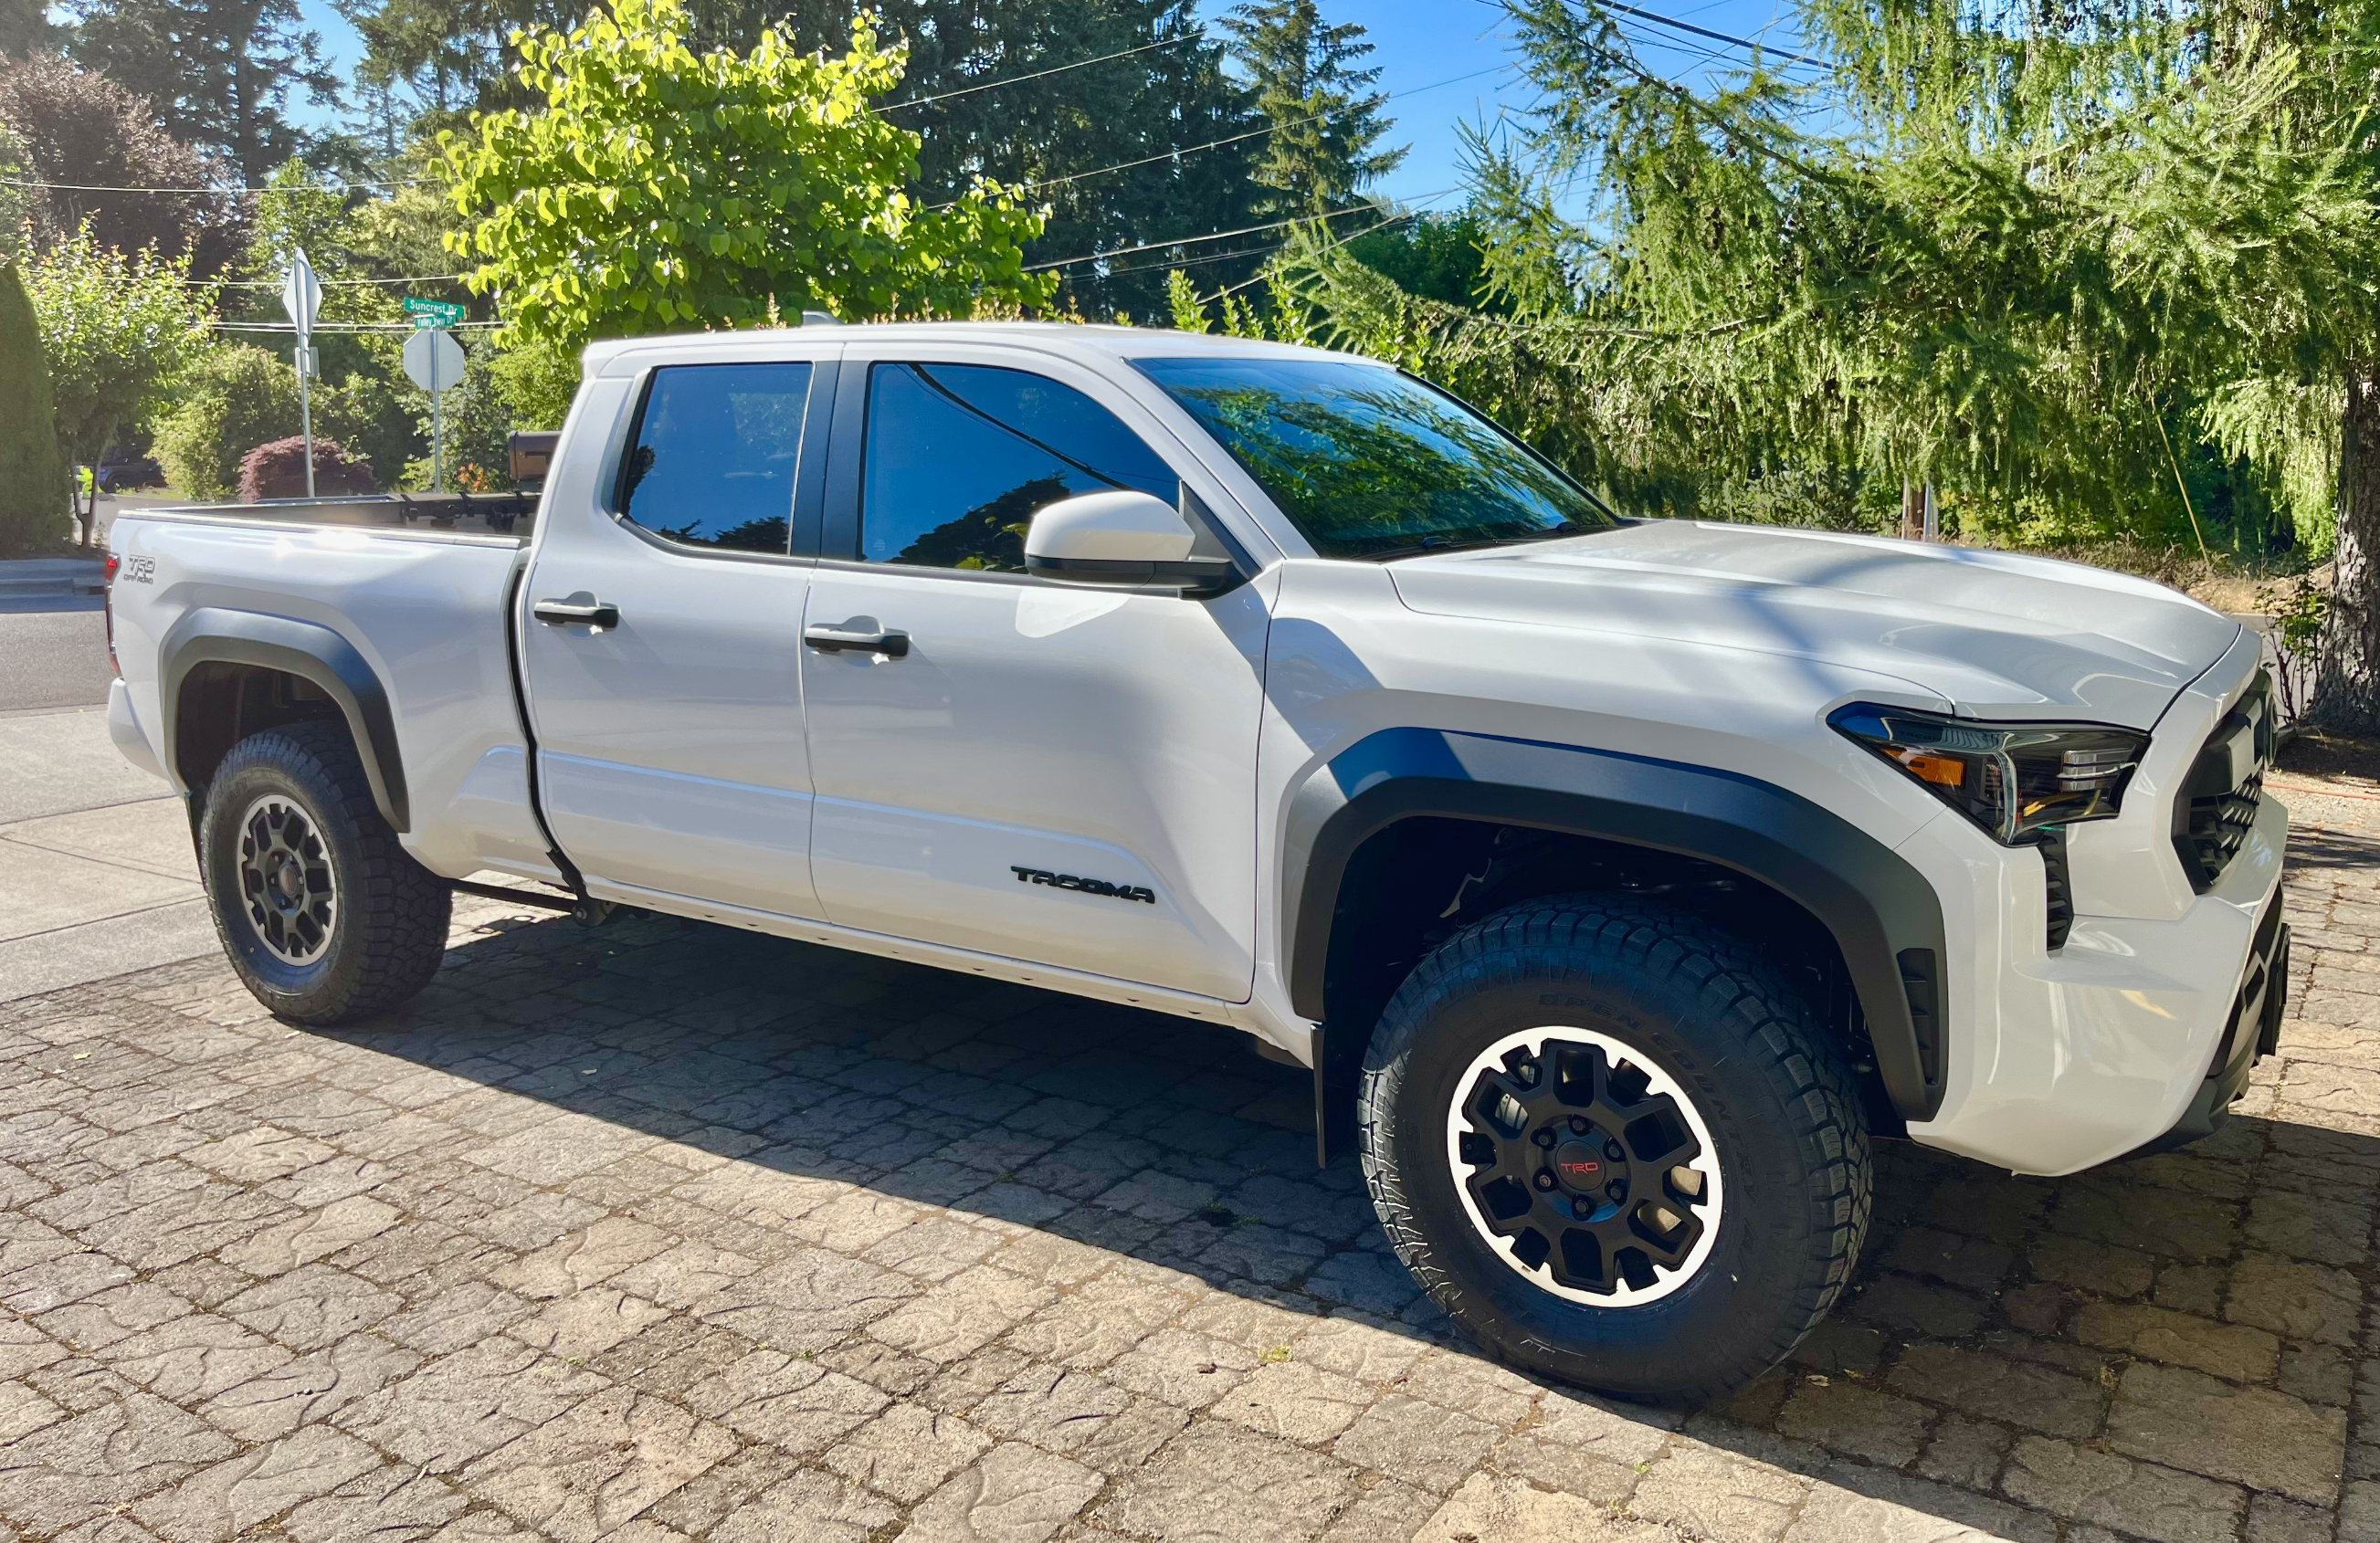 2024 Tacoma 285/70/17 Toyo Open Country AT3 Tires Installed on Stock Suspension Screenshot 2024-07-03 at 6.21.08 PM